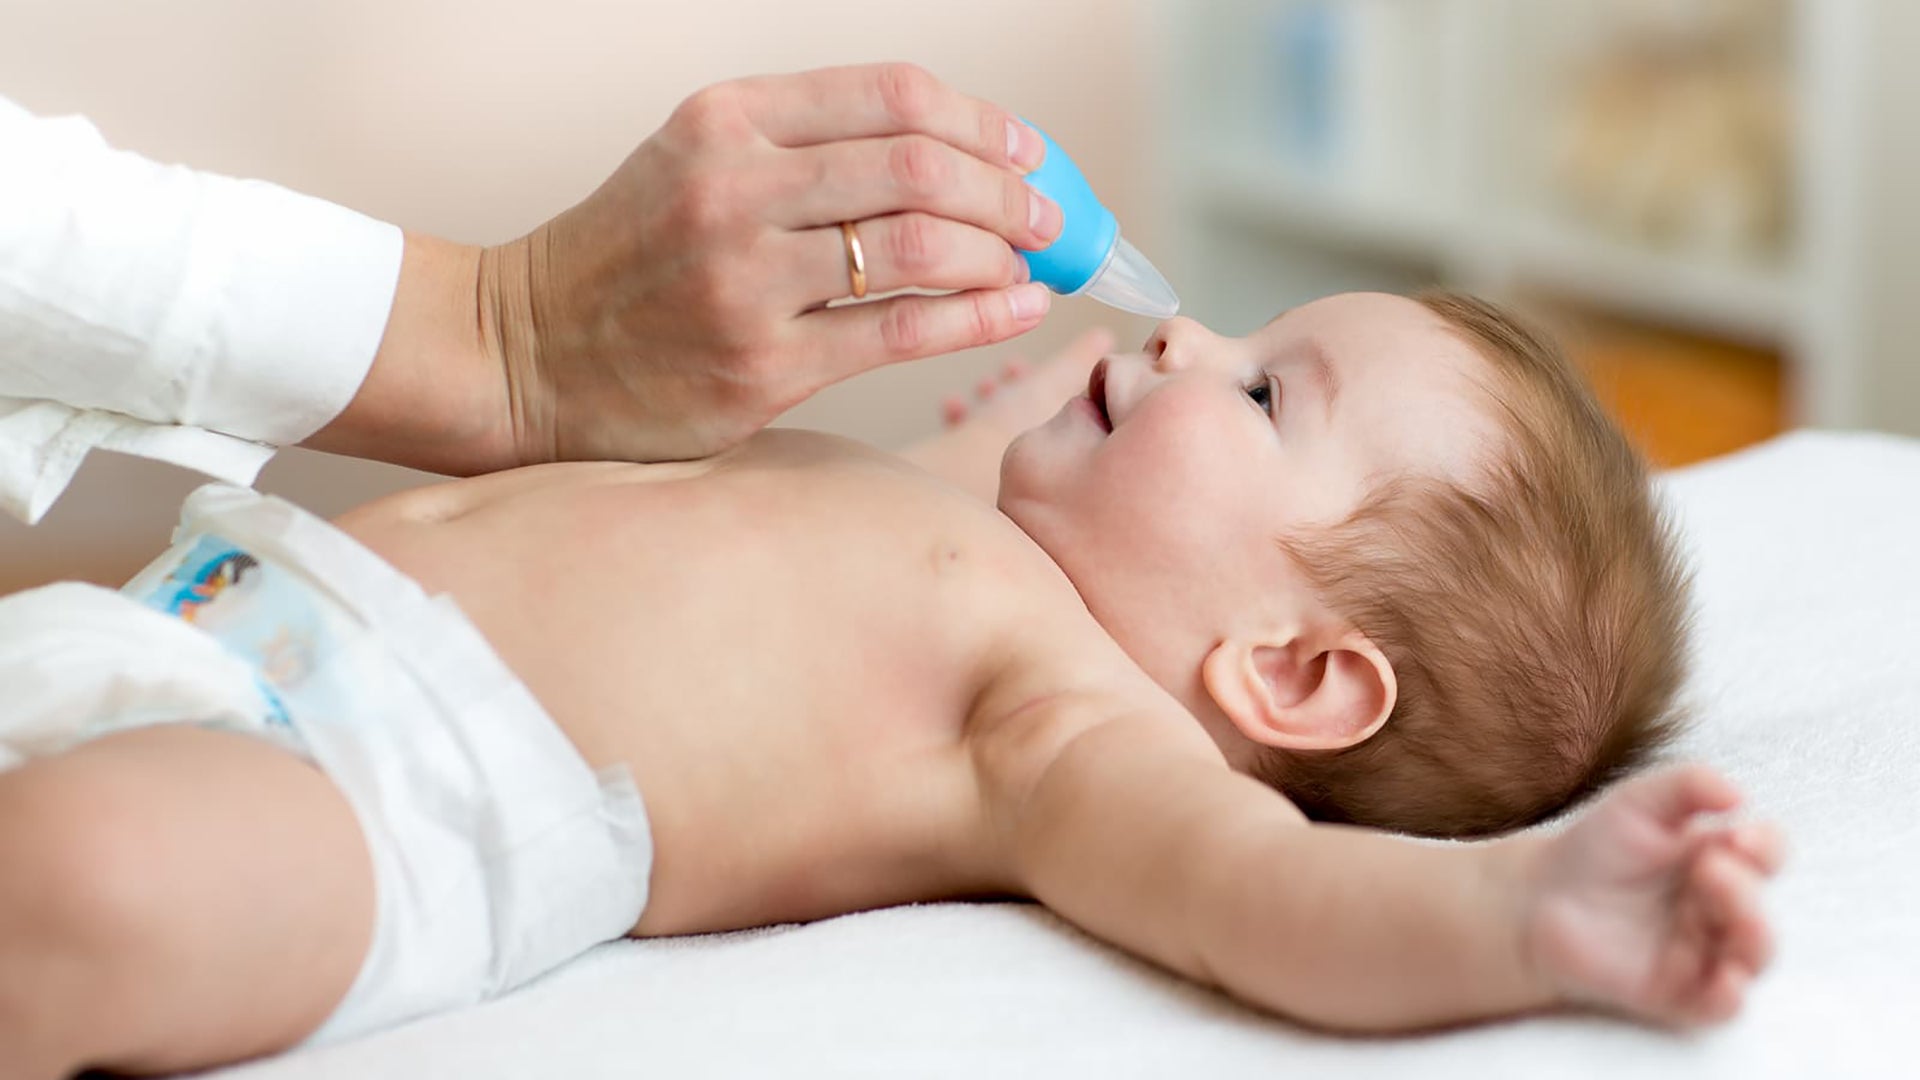 Best and Worst Nasal Aspirators for Babies